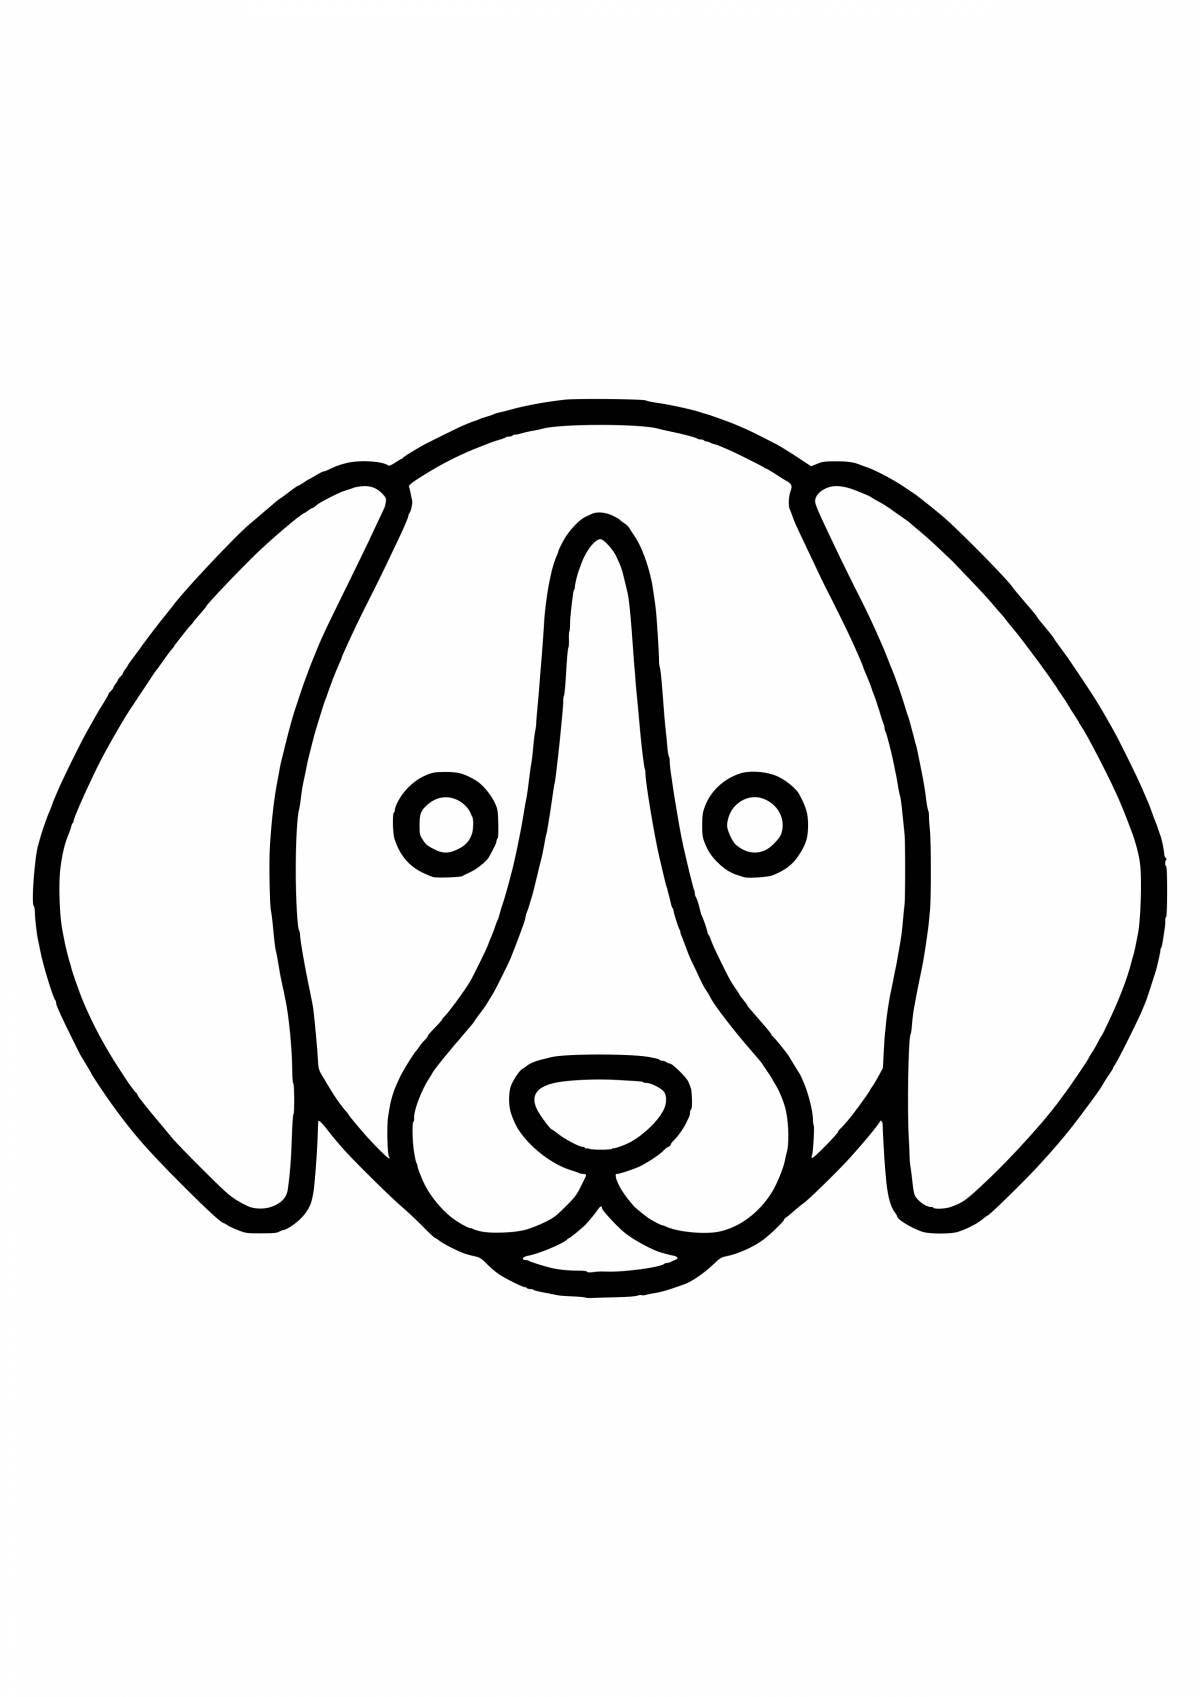 Live dog head coloring page